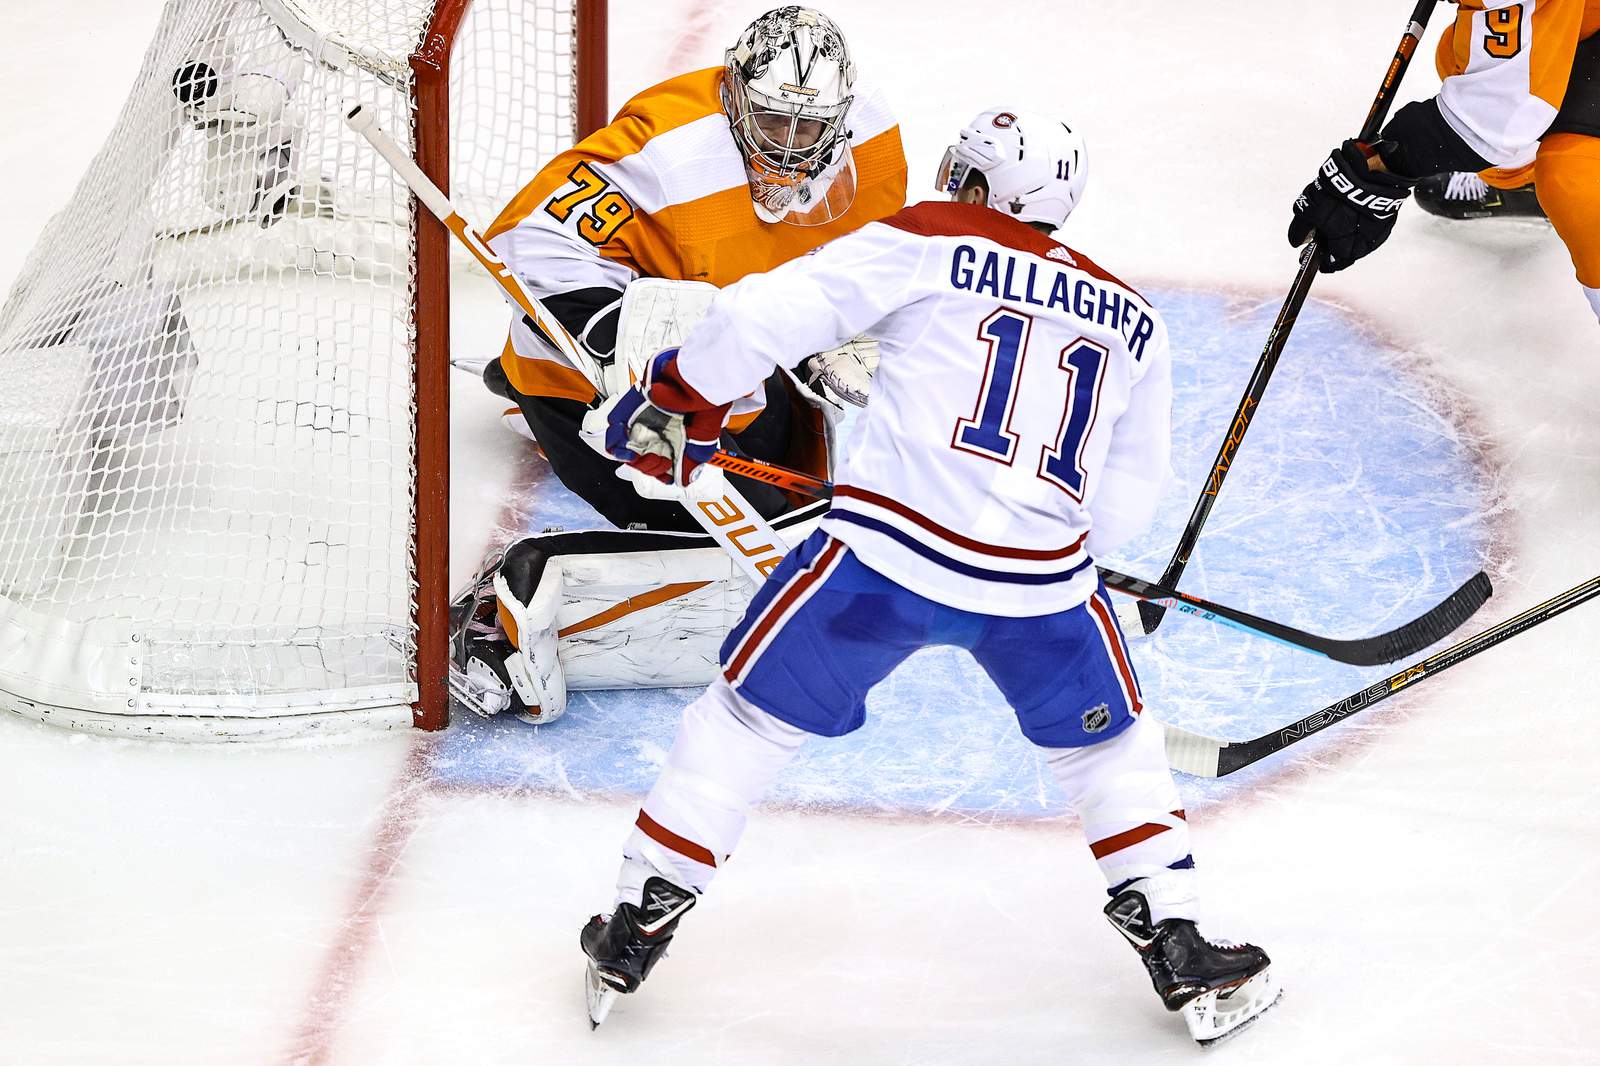 Canadiens beat Flyers 3-2 in Game 5 to stave off elimination